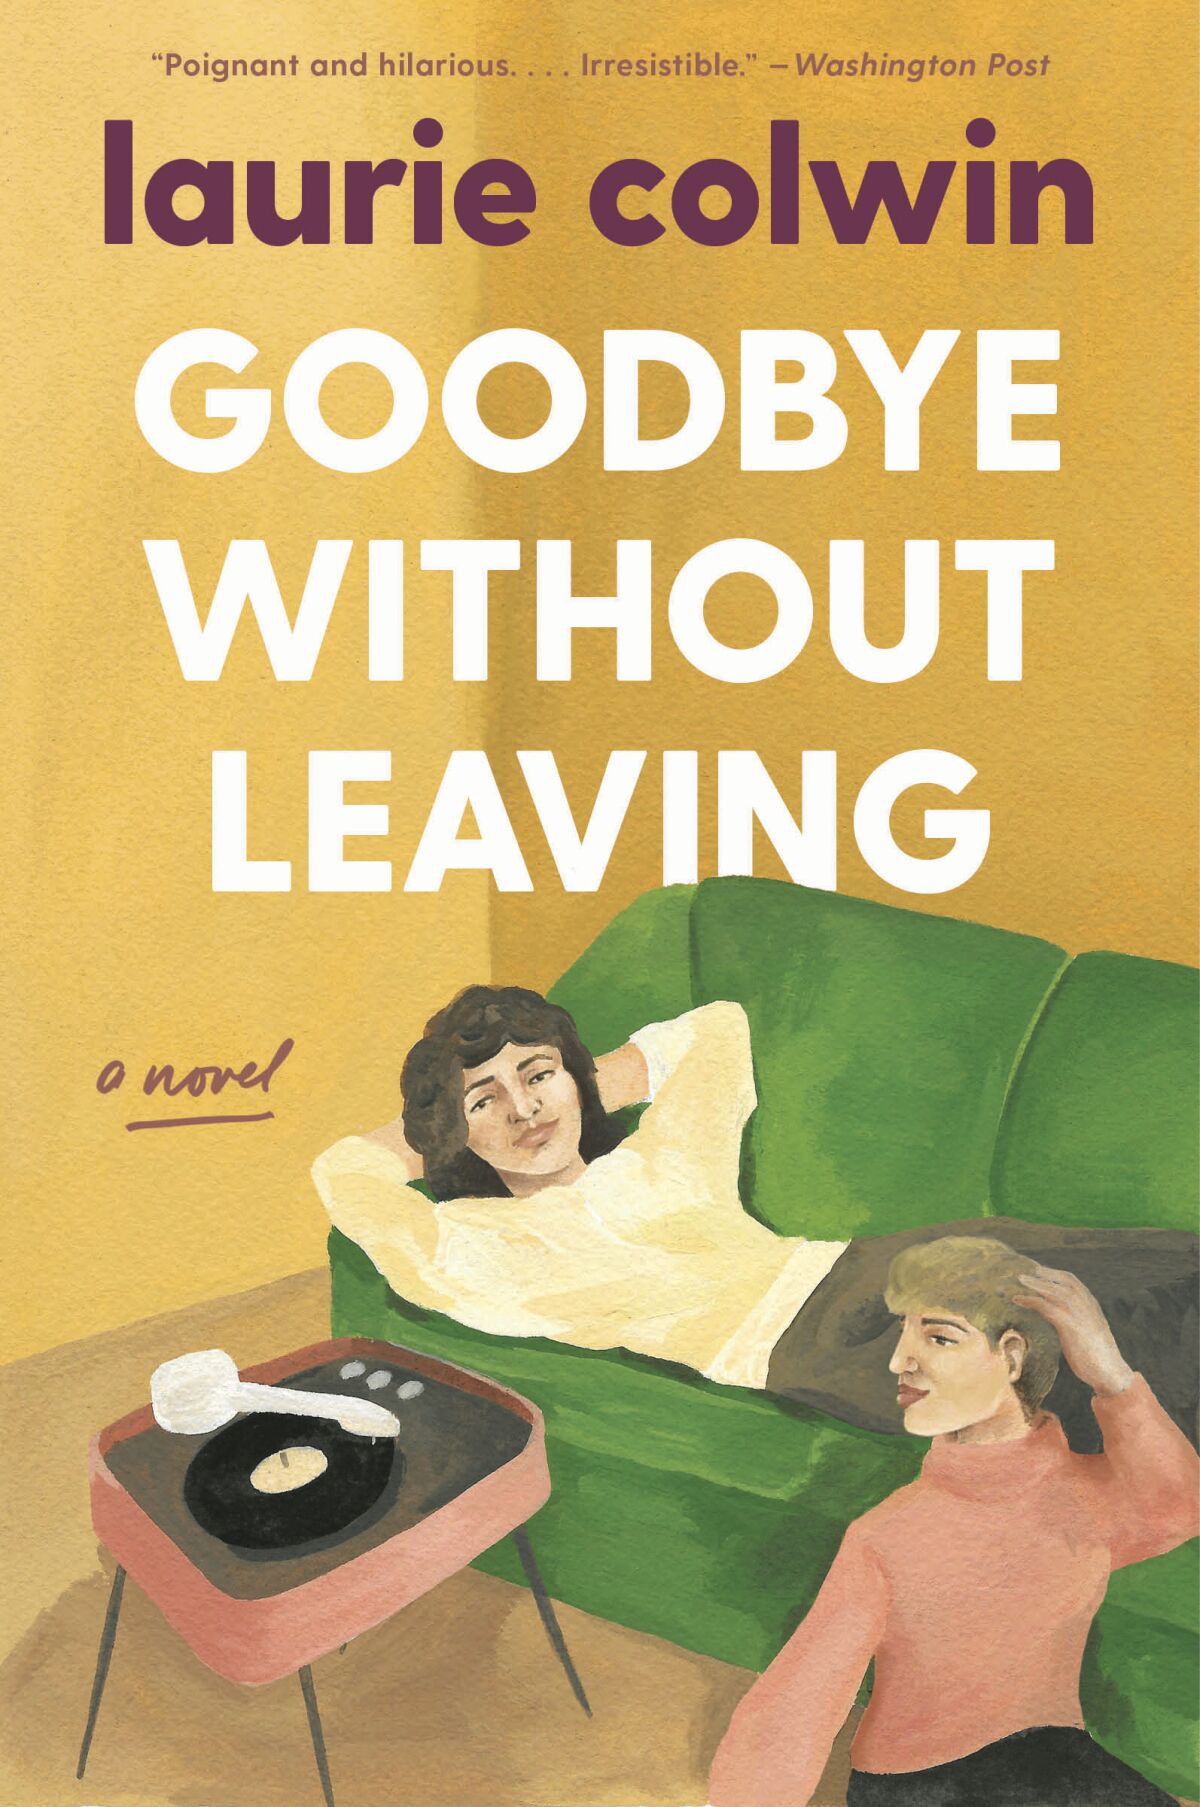 Laurie Colwin's "Goodbye Without Leaving."